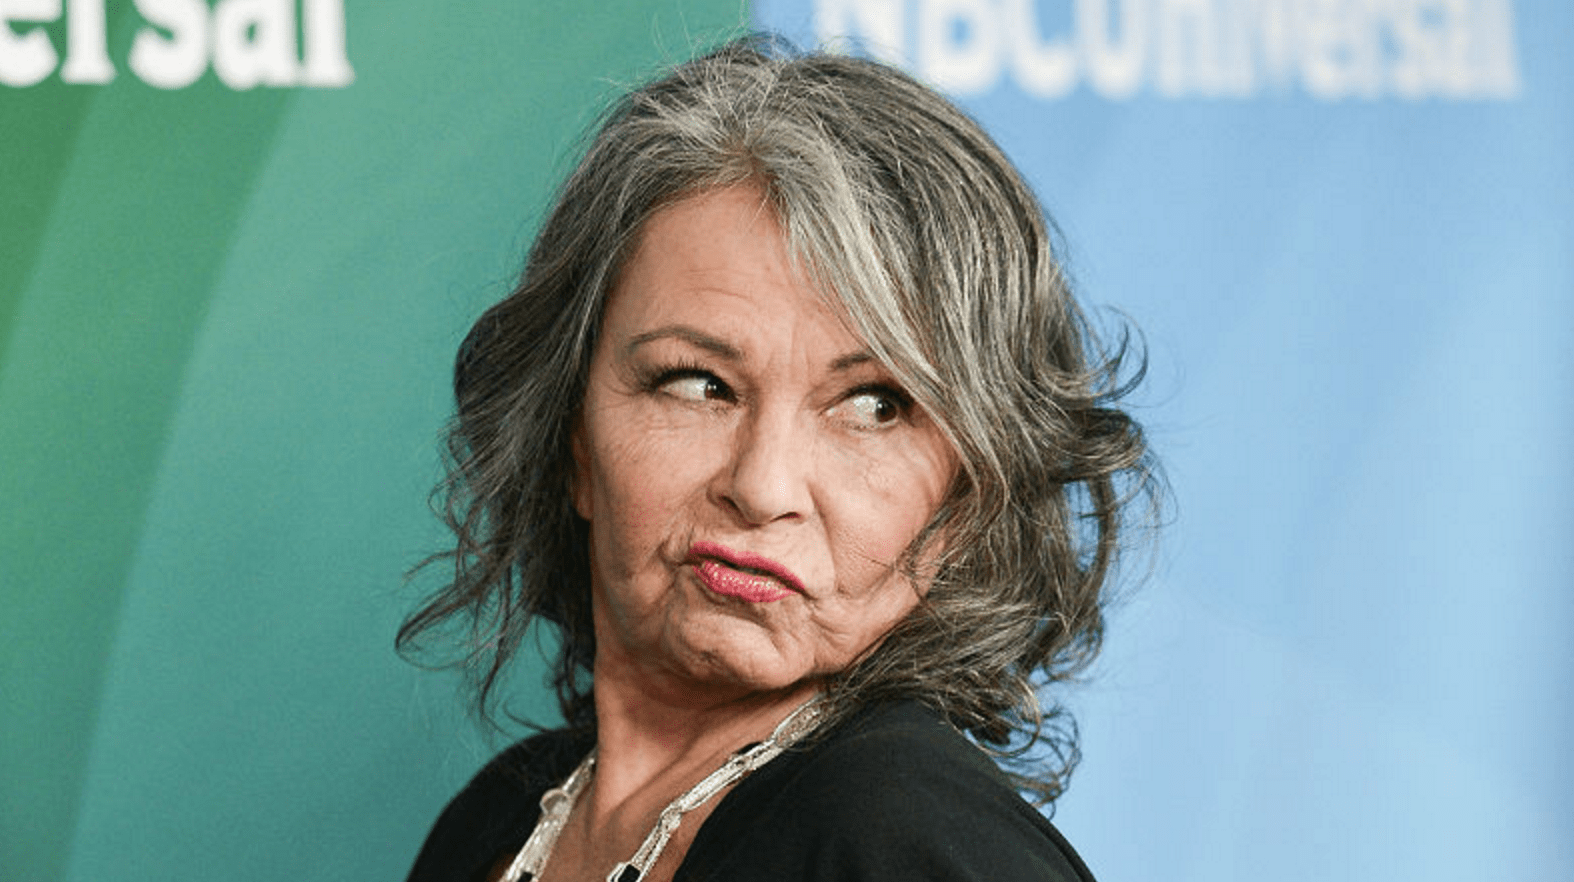 Roseanne Barr Opening A Dispensary in Santa Ana: Roseanne’s joint